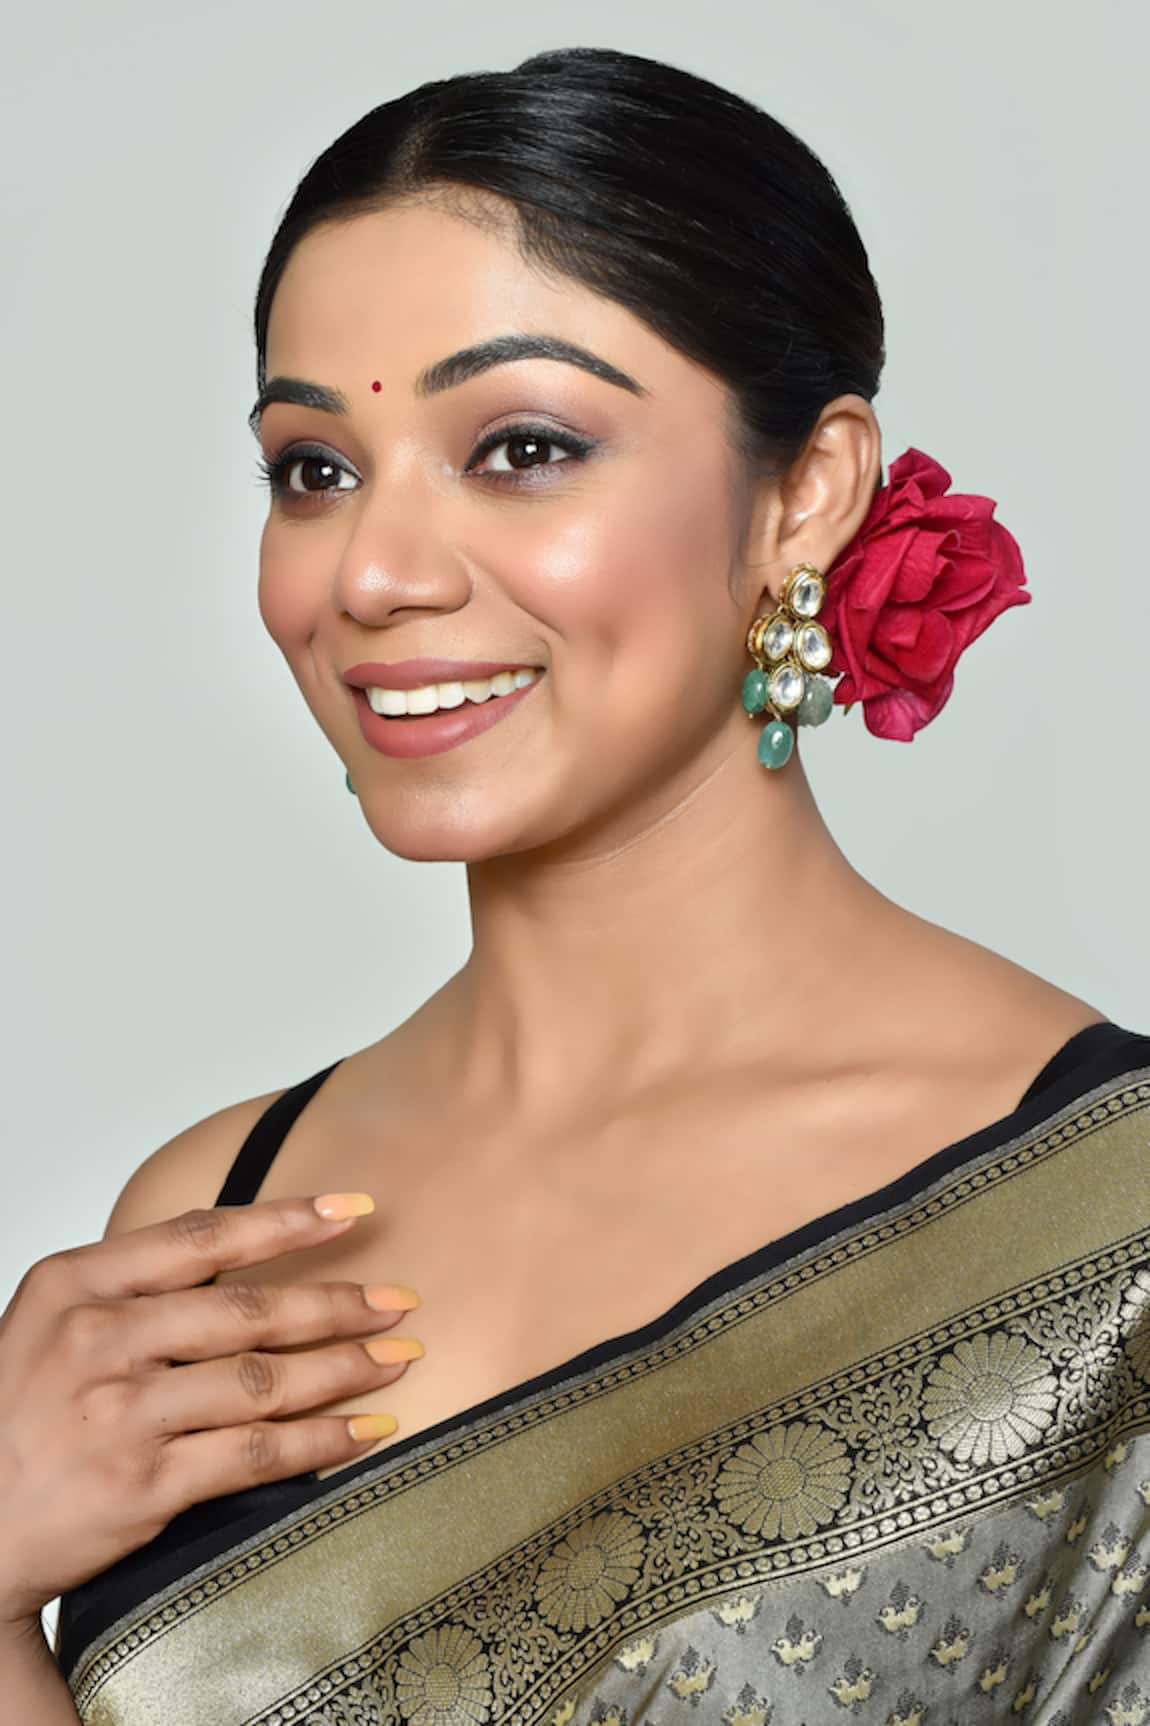 Just Shradha's Drop Pattern Embellished Earrings